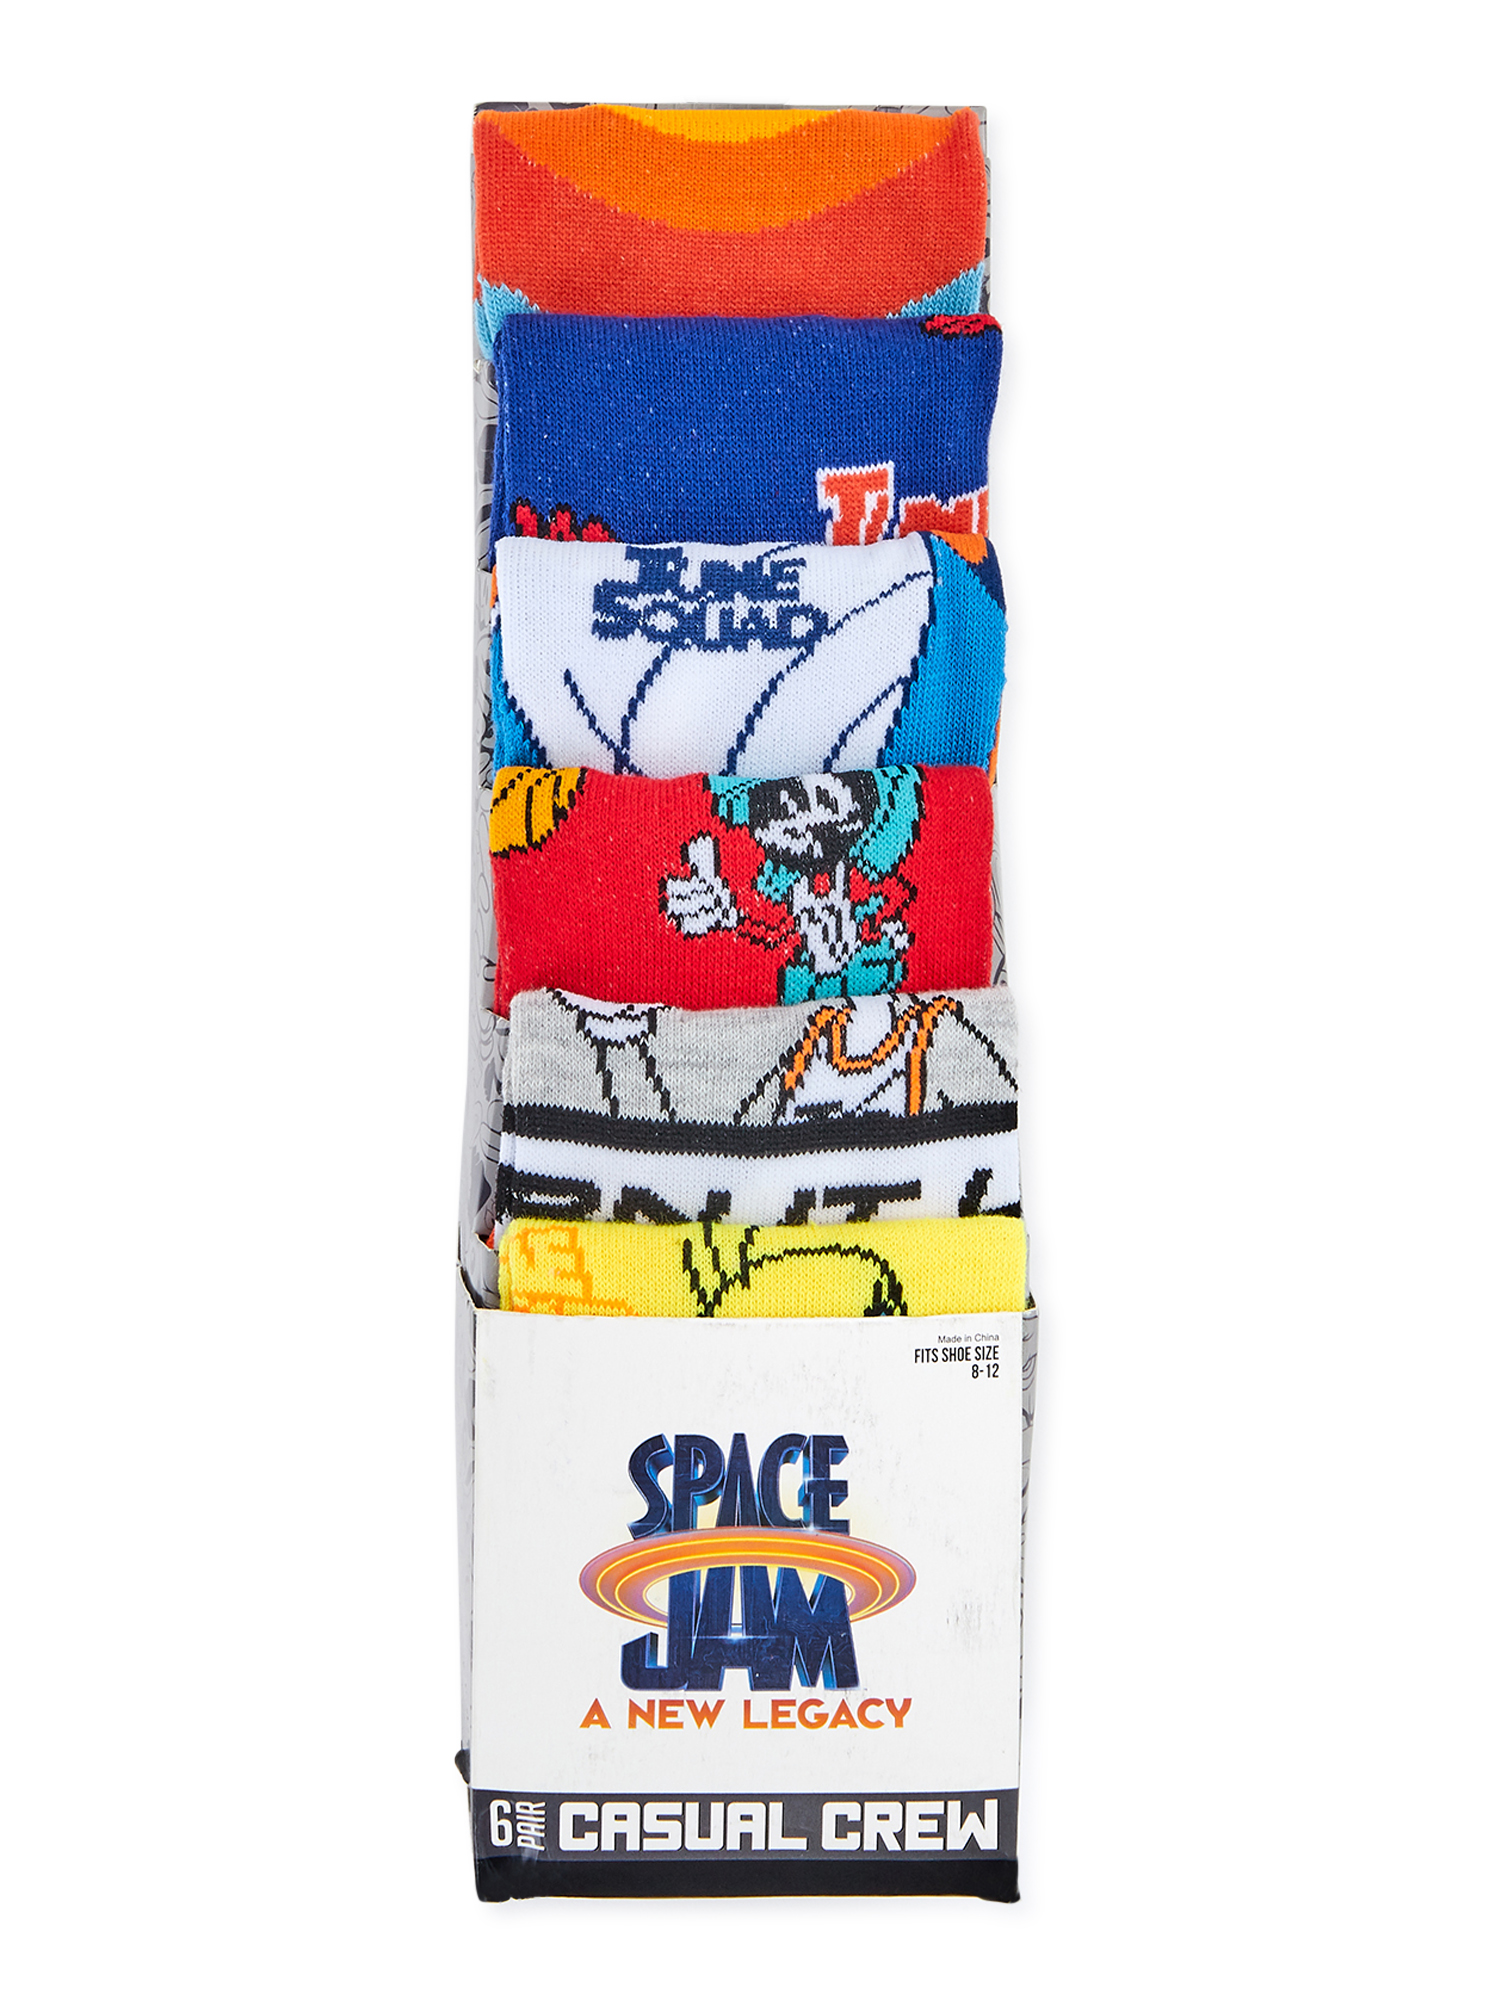 Space Jam: A New Legacy Men’s Crew Socks, 6-Pack - image 2 of 2